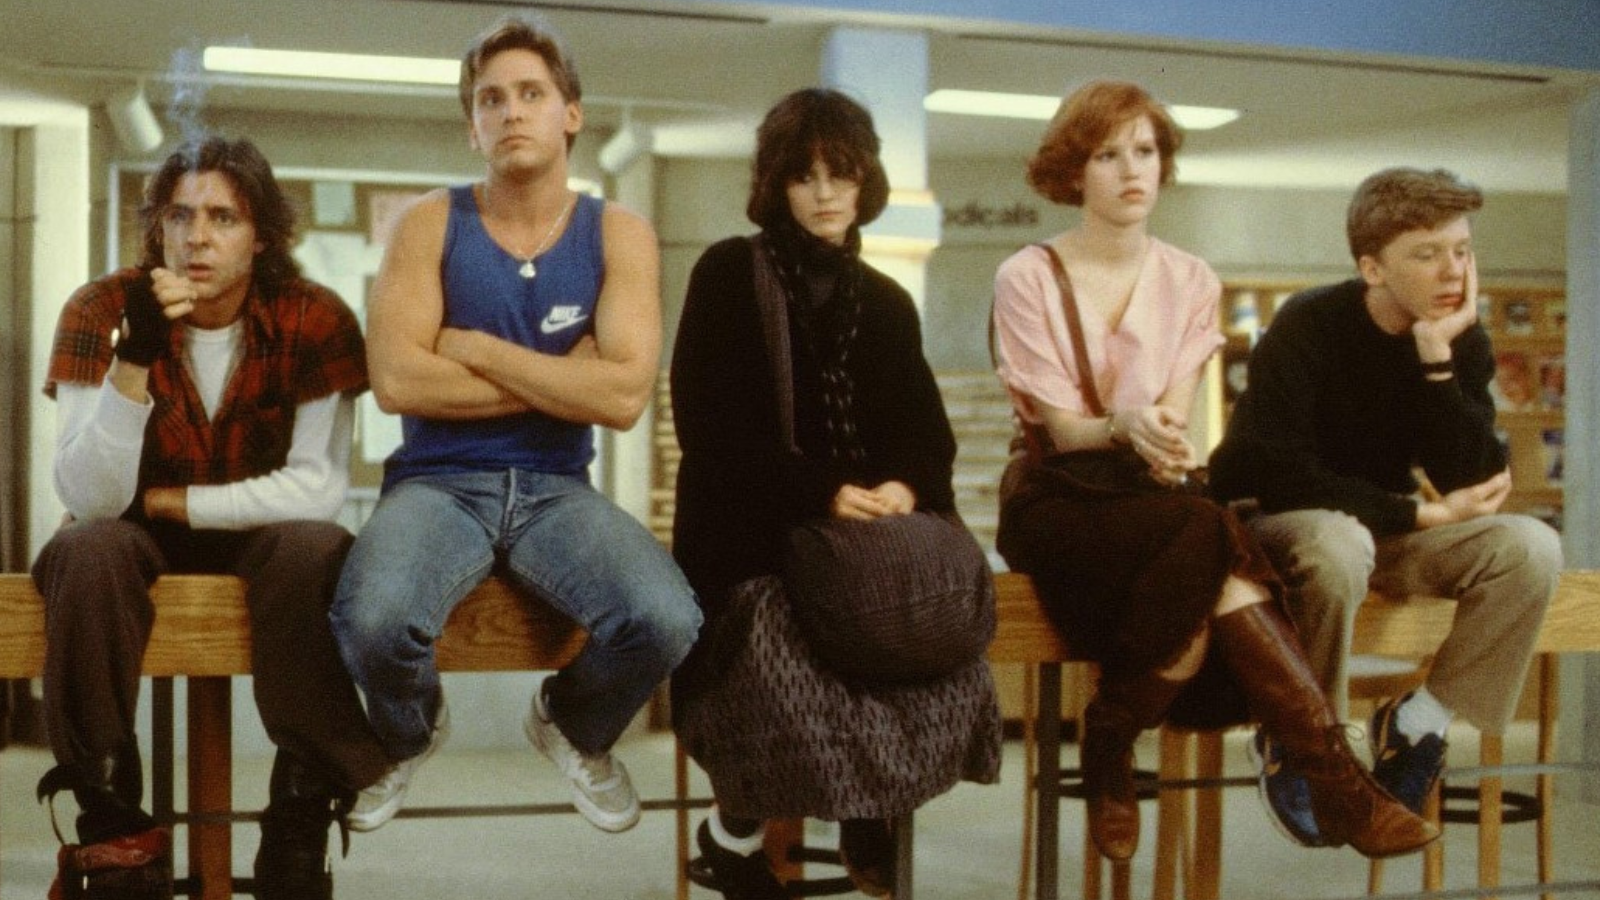 <p><span>One of the 1980s’ most memorable movies, <em>The Breakfast Club</em> showcases five people who find themselves in detention and spend an afternoon together.</span></p><p><span>We have the jock, the nerd, the goth, the straight-A student, and the burnout, who all come together to understand their differences during a lengthy Saturday detention. In the 80s, kids didn’t have a swath of electronic devices to entertain themselves with, so they did what every other person in the 80s did. They talked.</span></p><p><a class="theme markdown__link" href="https://www.msn.com/en-us/channel/source/Movie%20Nights/sr-vid-d3yx0j8wg3fdqxaqdfi2763g5nci5pve998s6wqpatsfh409wnvs" rel="noopener noreferrer">Follow us on MSN to see more of our exclusive entertainment content.</a></p>